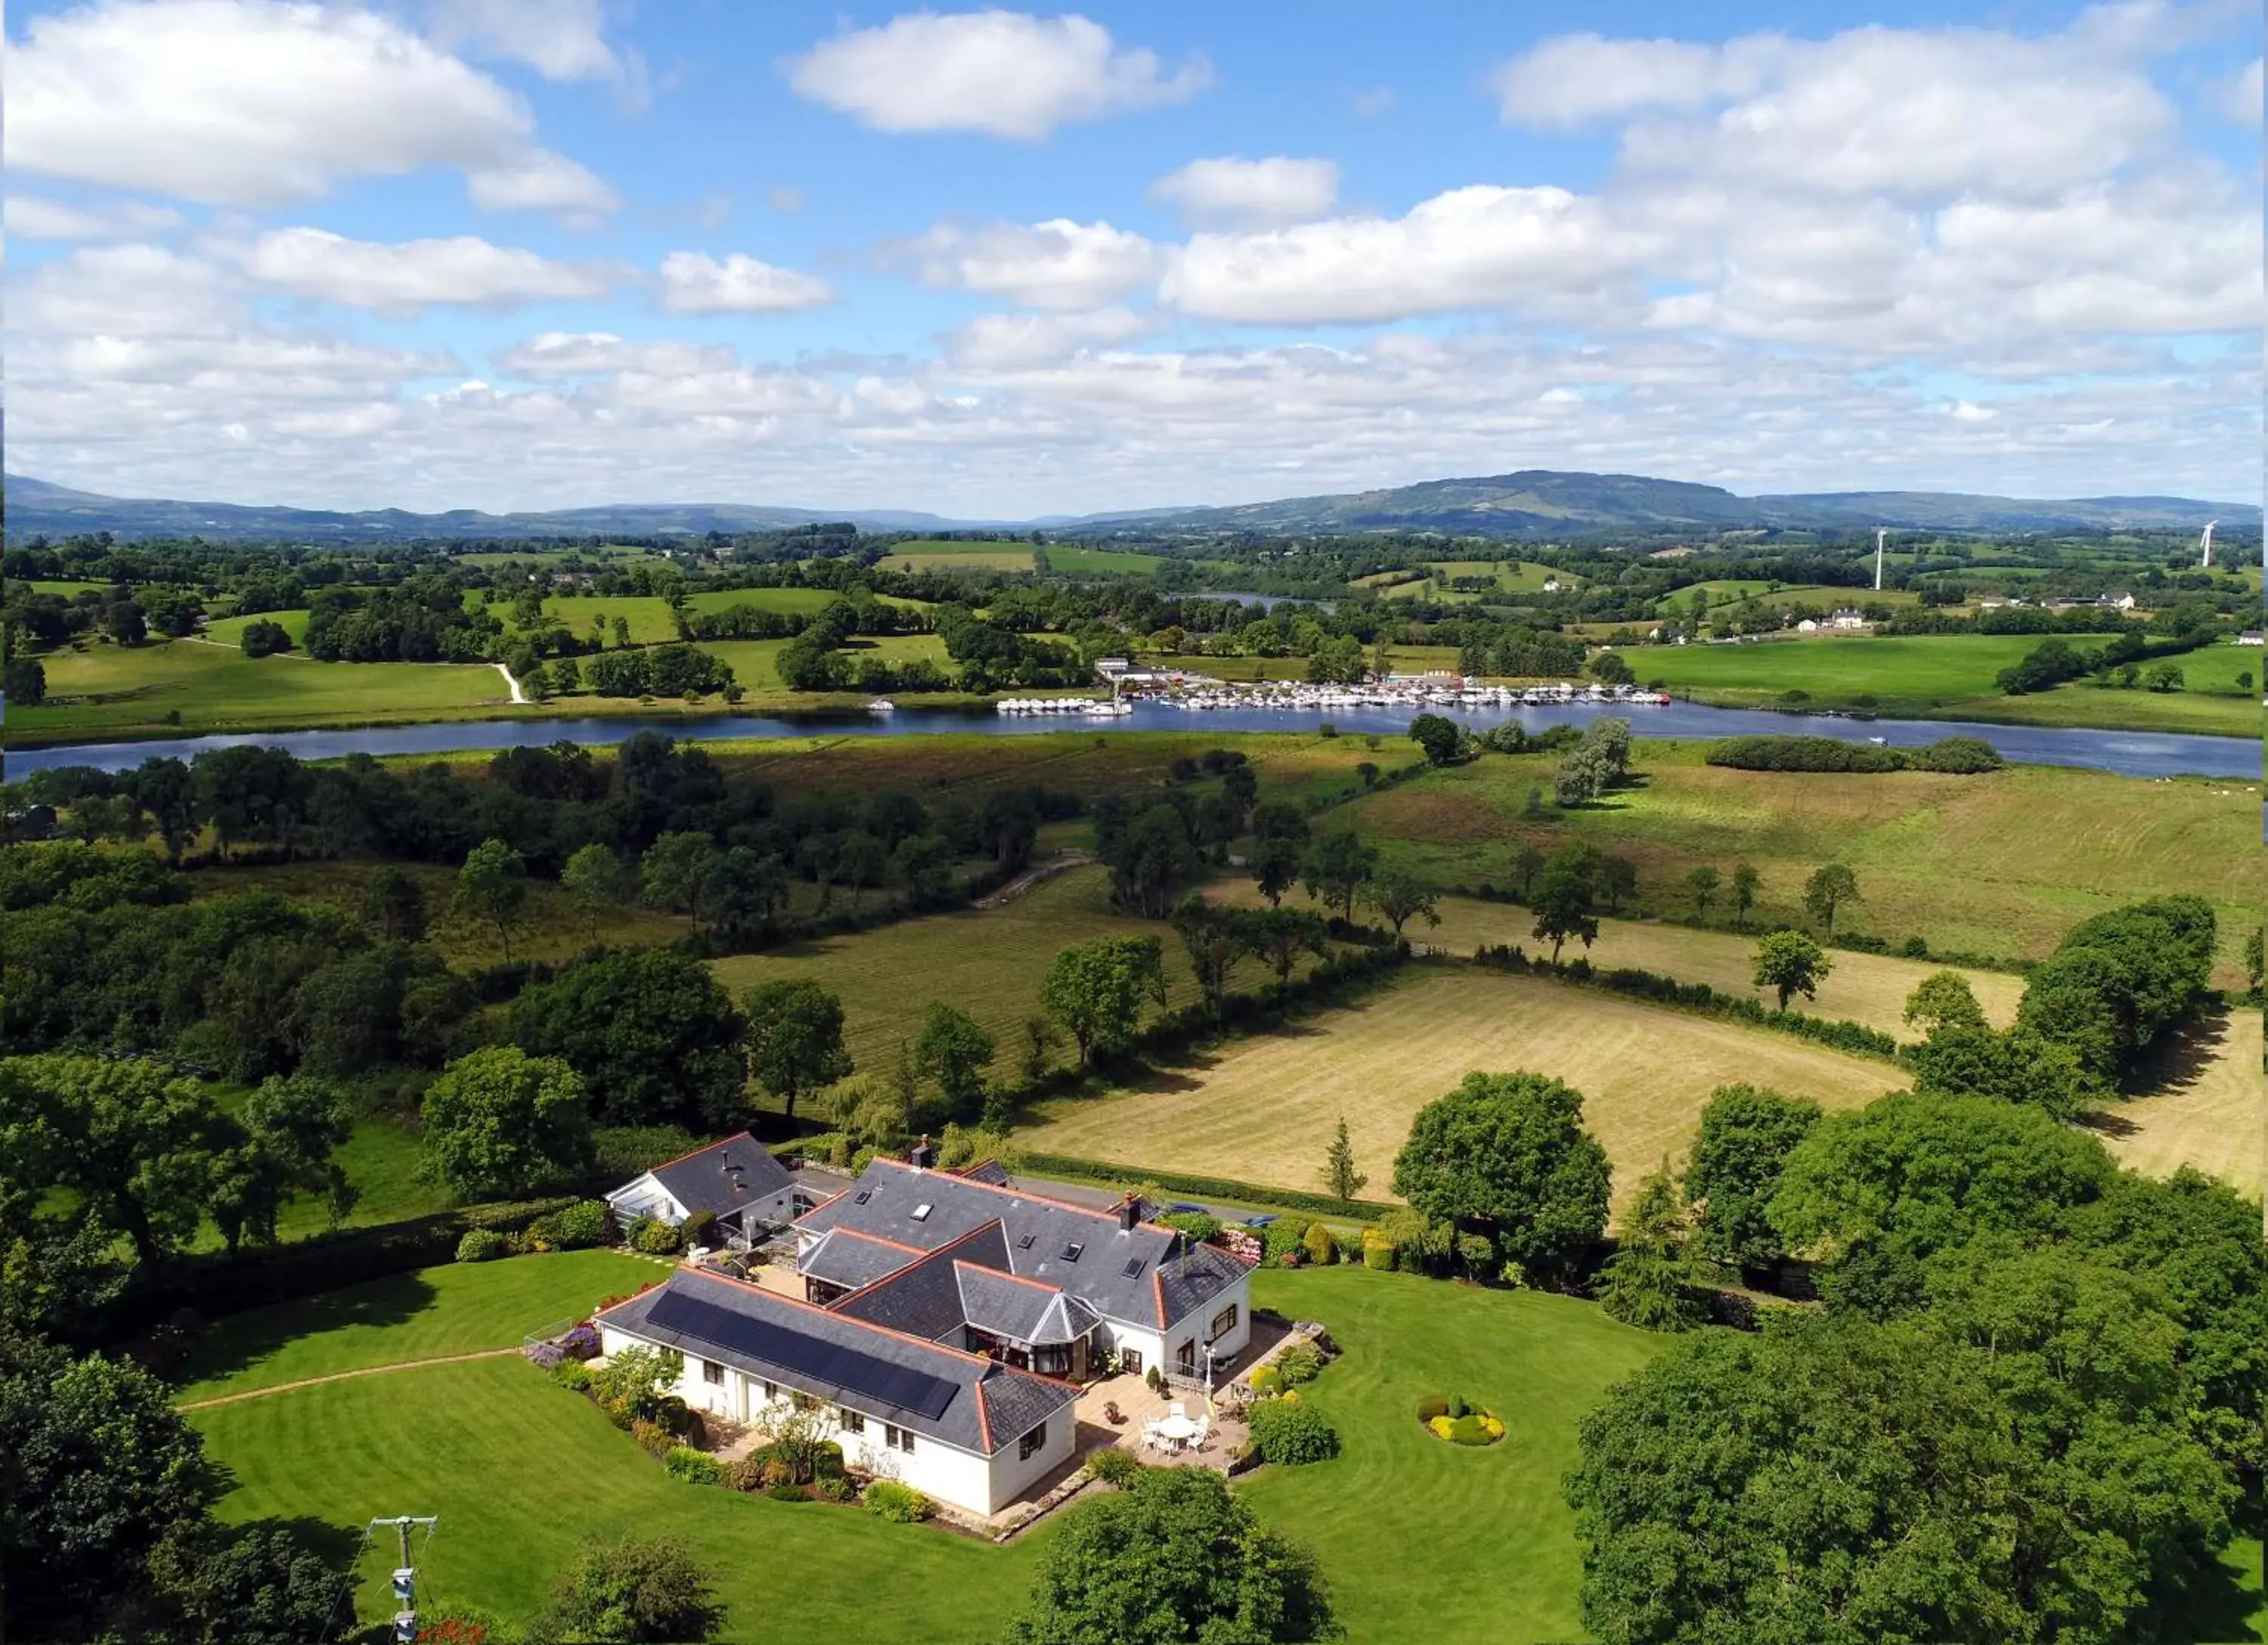 Lake view, Bird's-eye View in Willowbank House